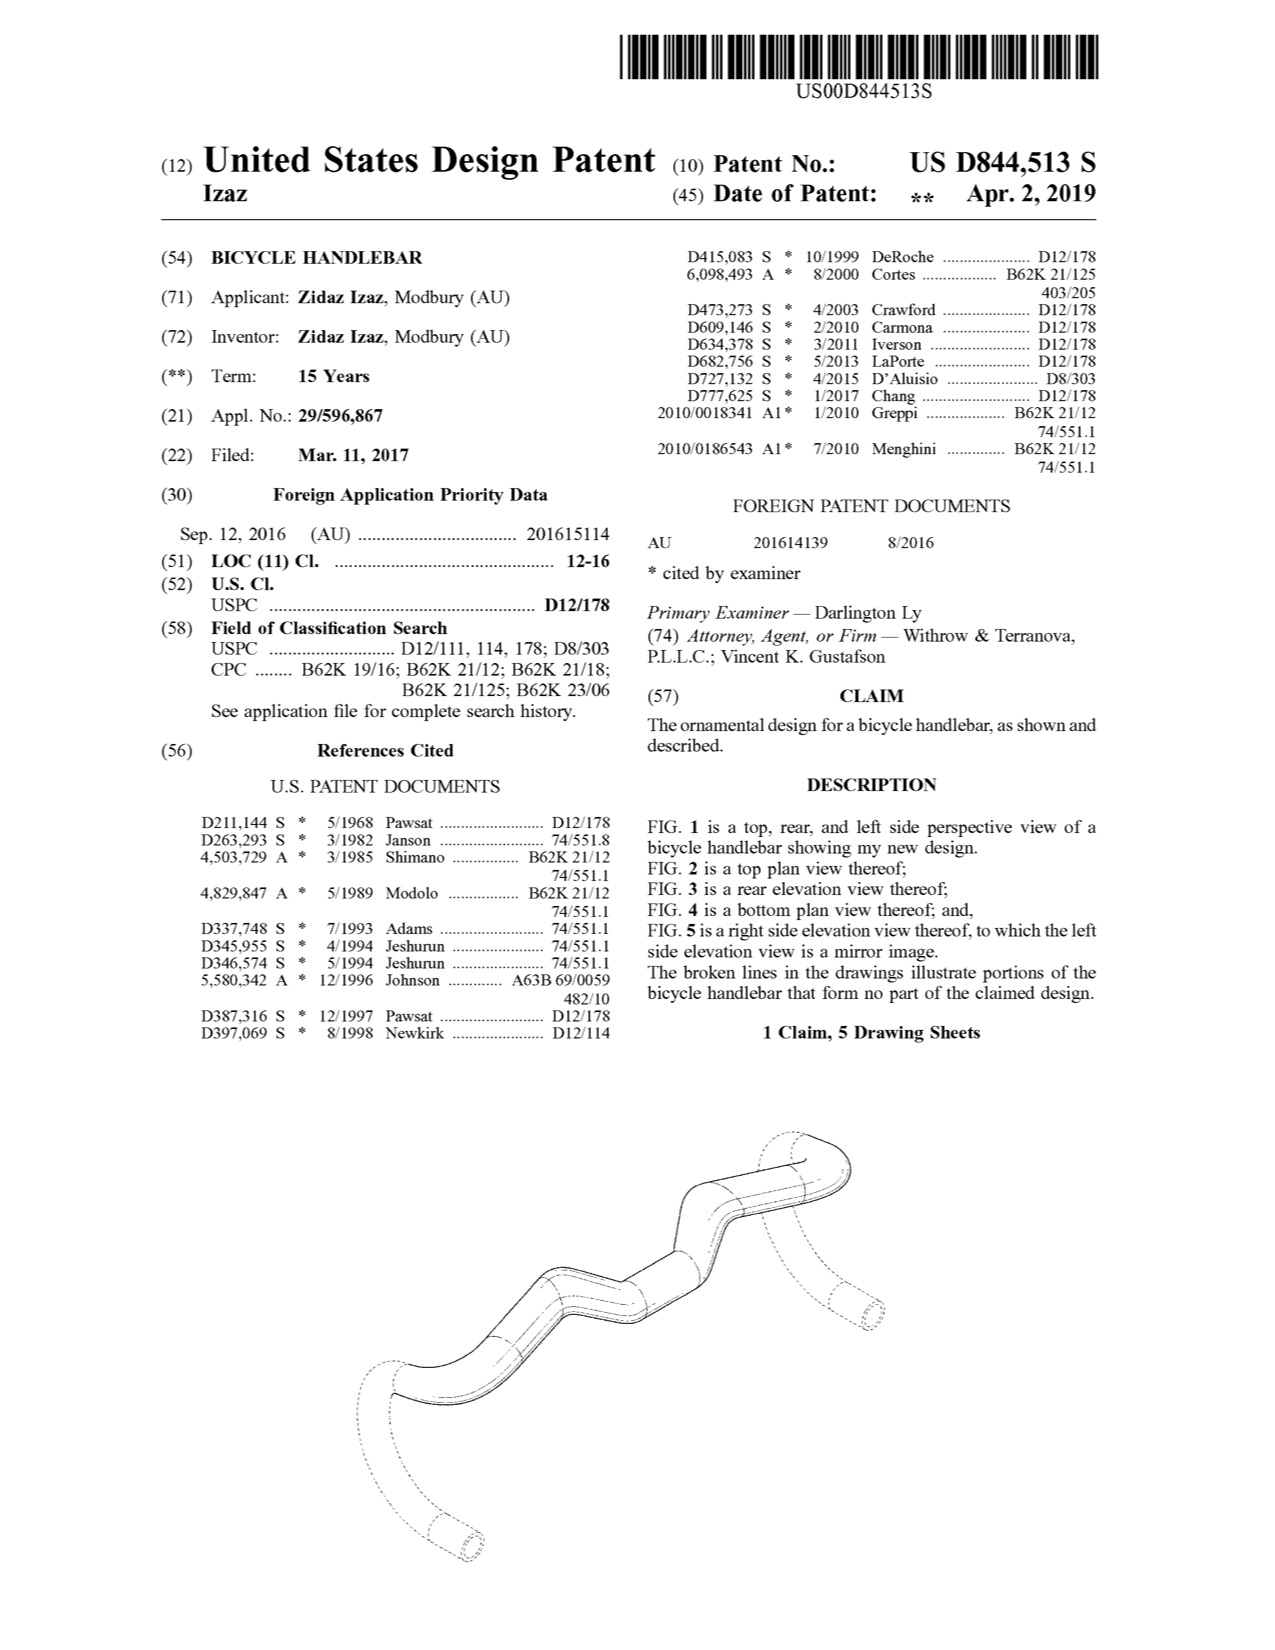 The first page of Izaz's design patent.